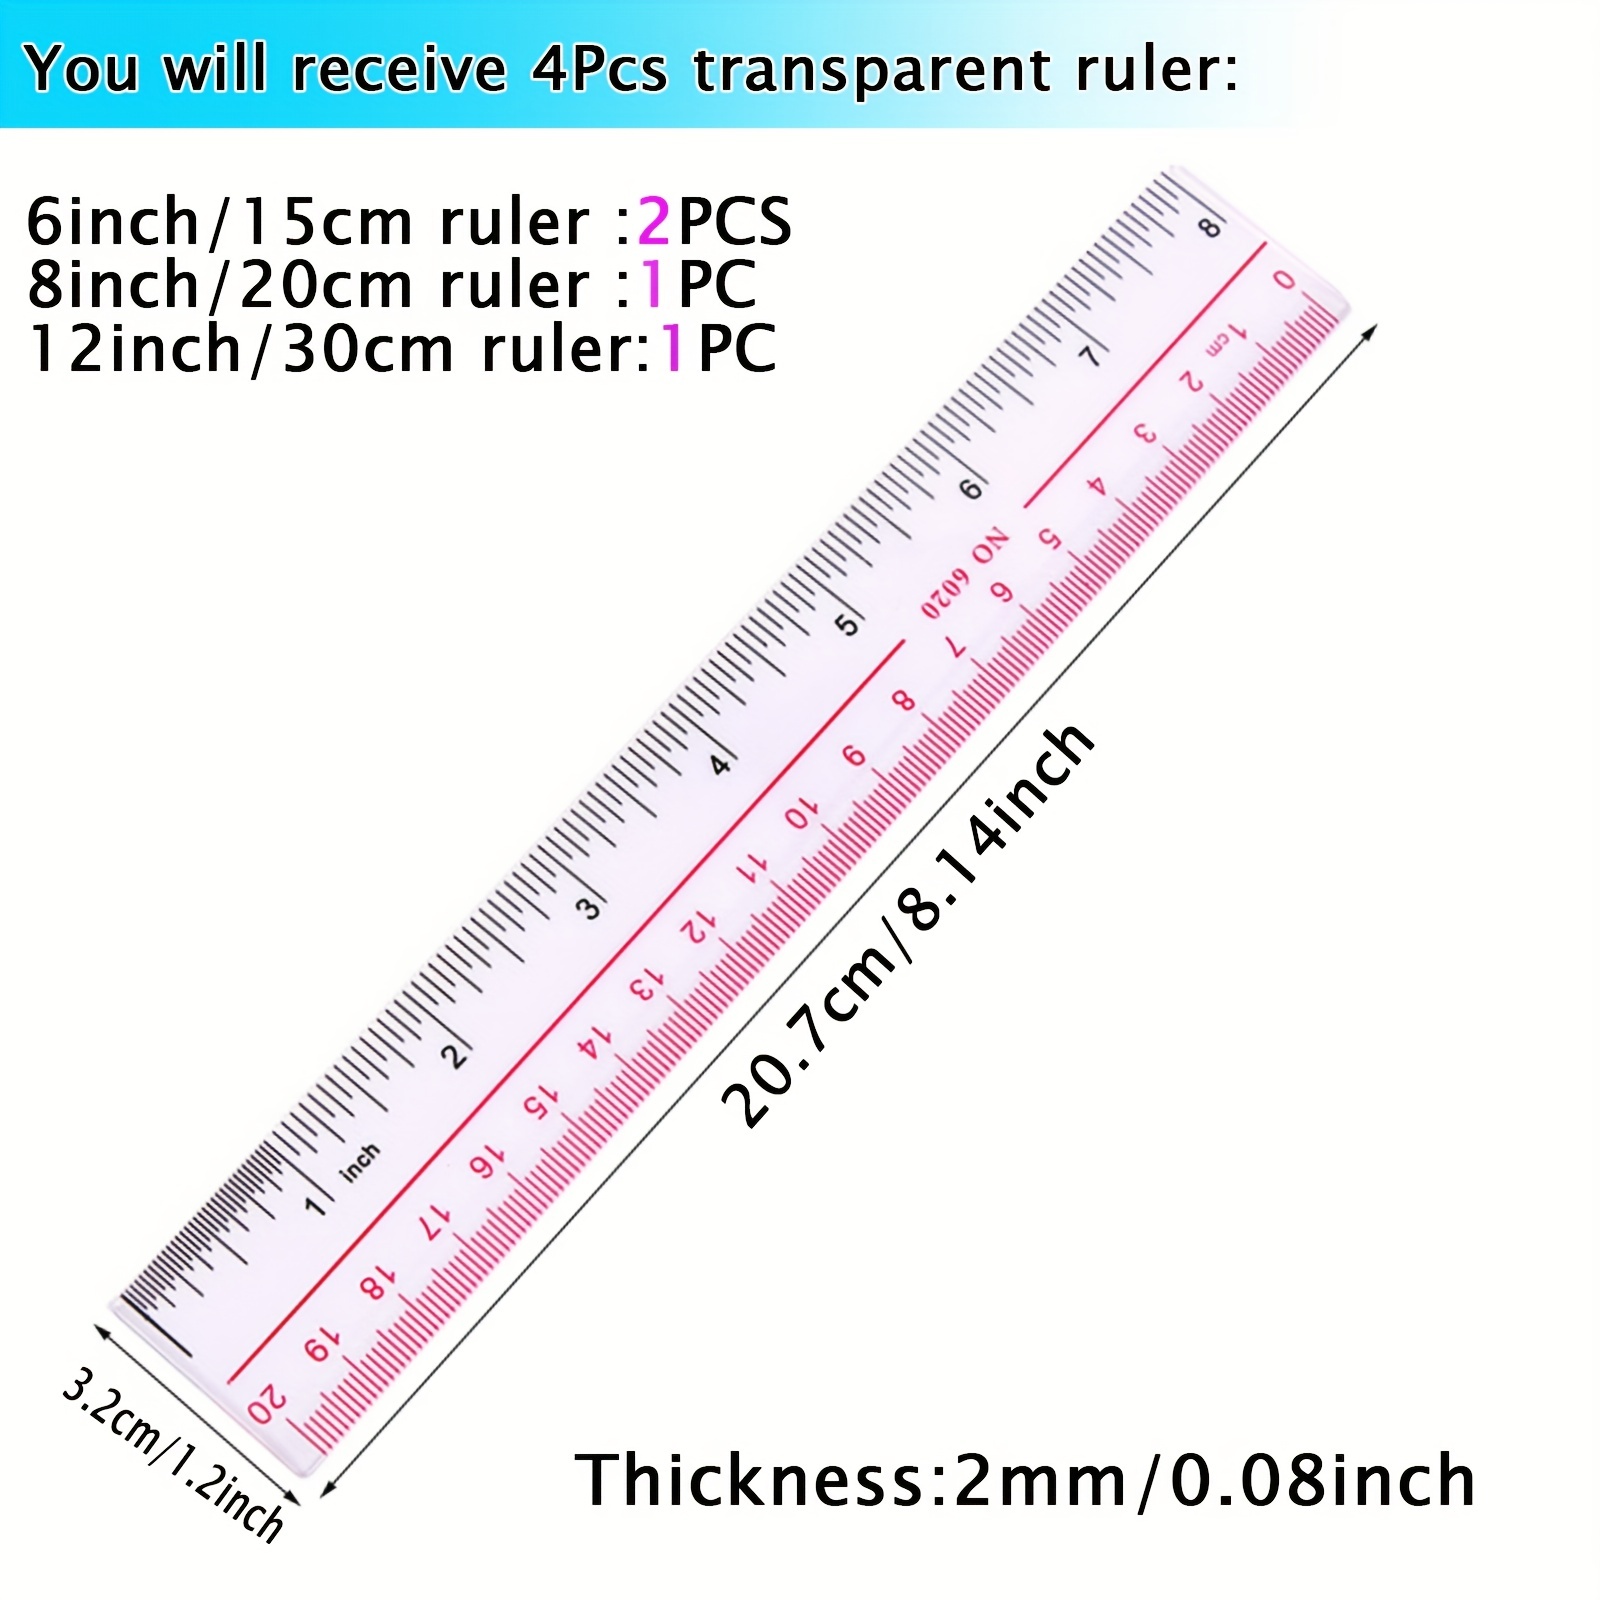 Unique Bargains Plastic Drawing Tool Rolling Ruler Clear White 12.2 x 2.4  x 0.83 1 Pc